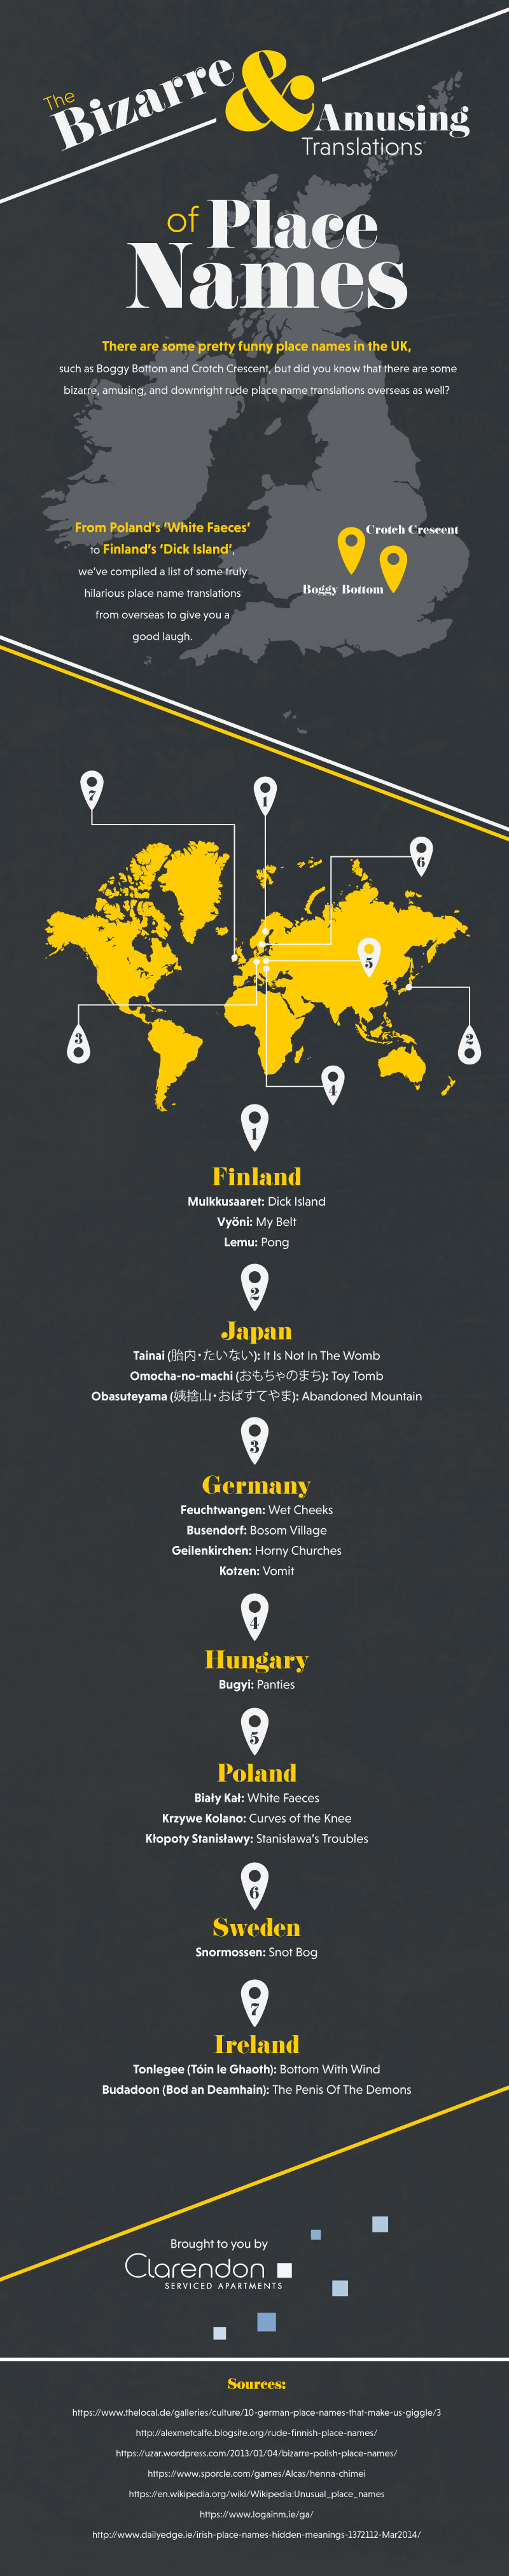 The Bizarre & Amusing Translations of Place Names Around The World [Infographic]